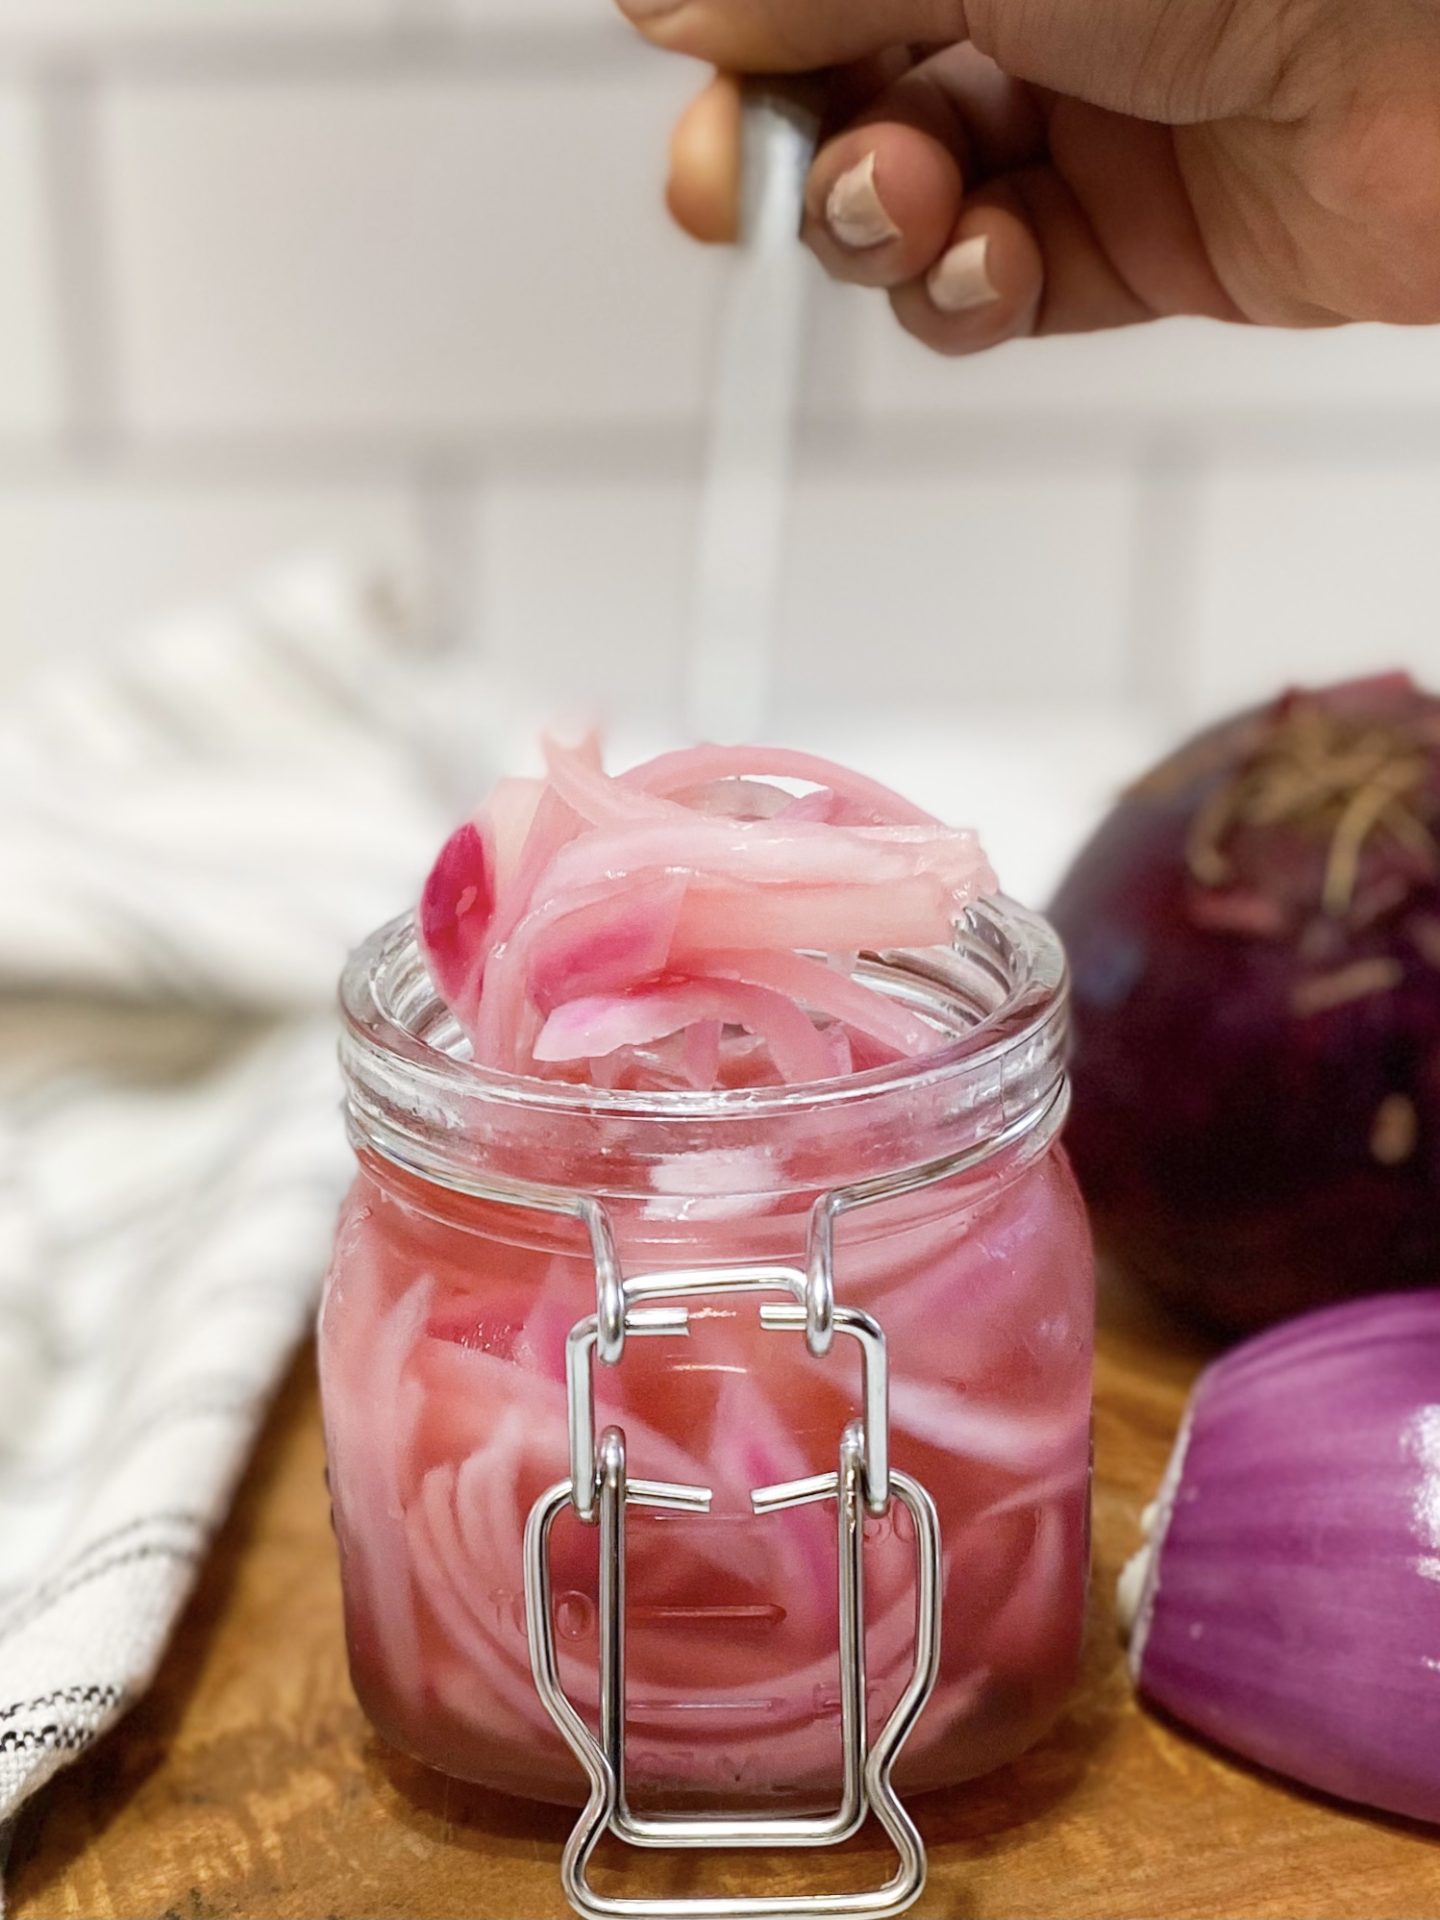 Pickled Red Onions in a small mason jar with latched lid. Jar is sitting on top of a brown small butting board with a sliced onion in half for aesthetic purposes. Hand is present holding a fork, lifting some of the pickled red onions out of the jar to show the finished product.